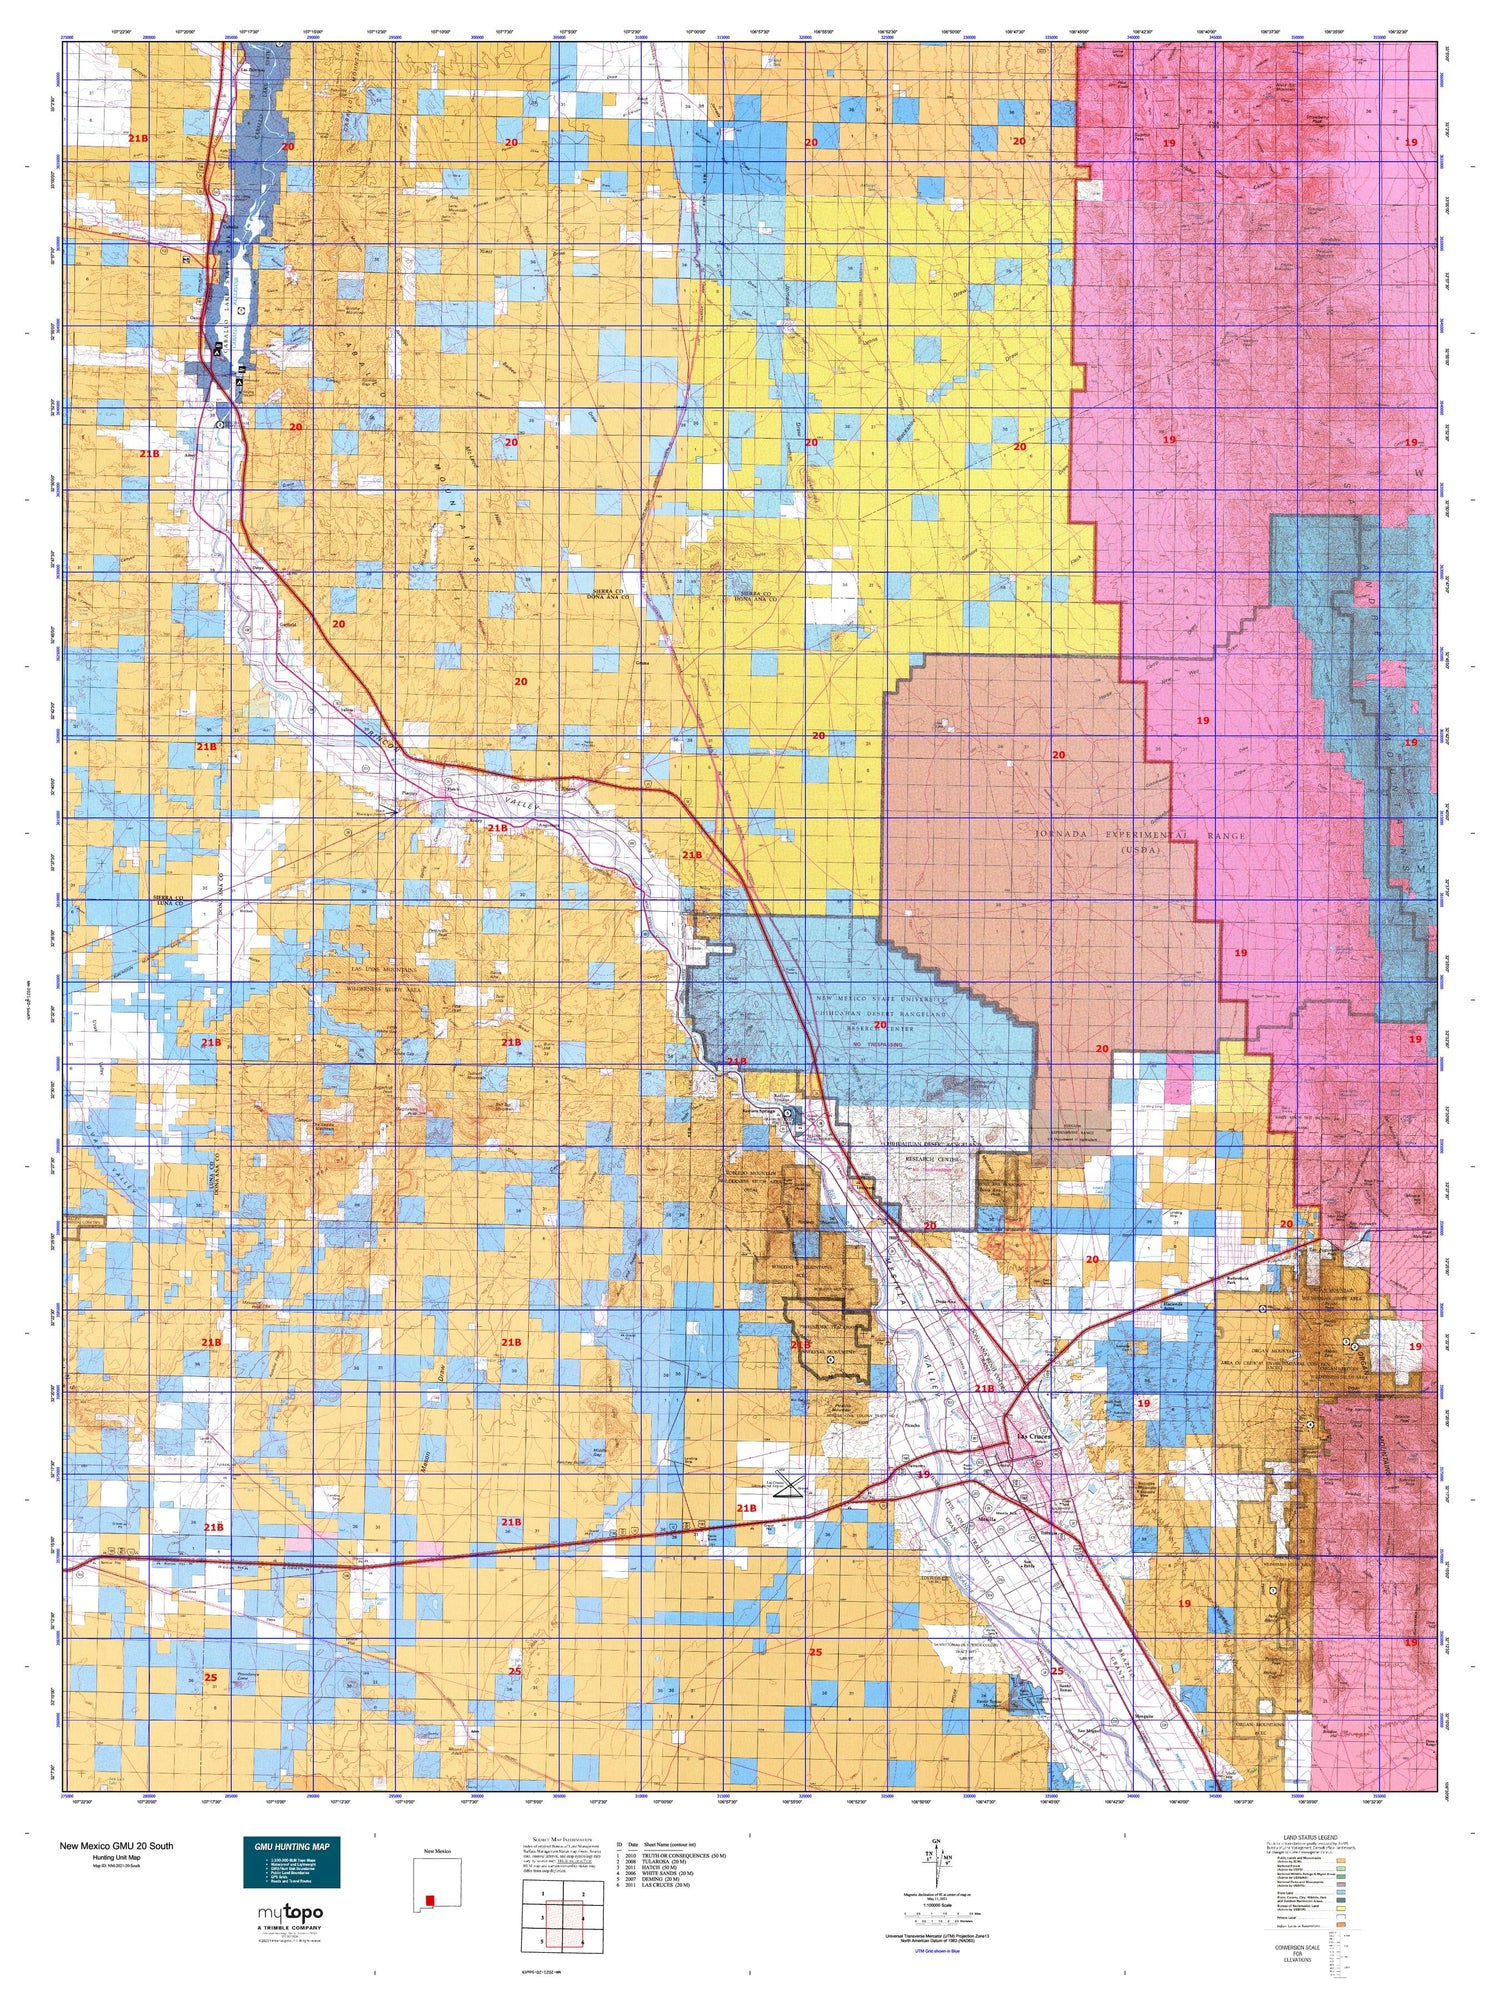 New Mexico GMU 20 South Map Image